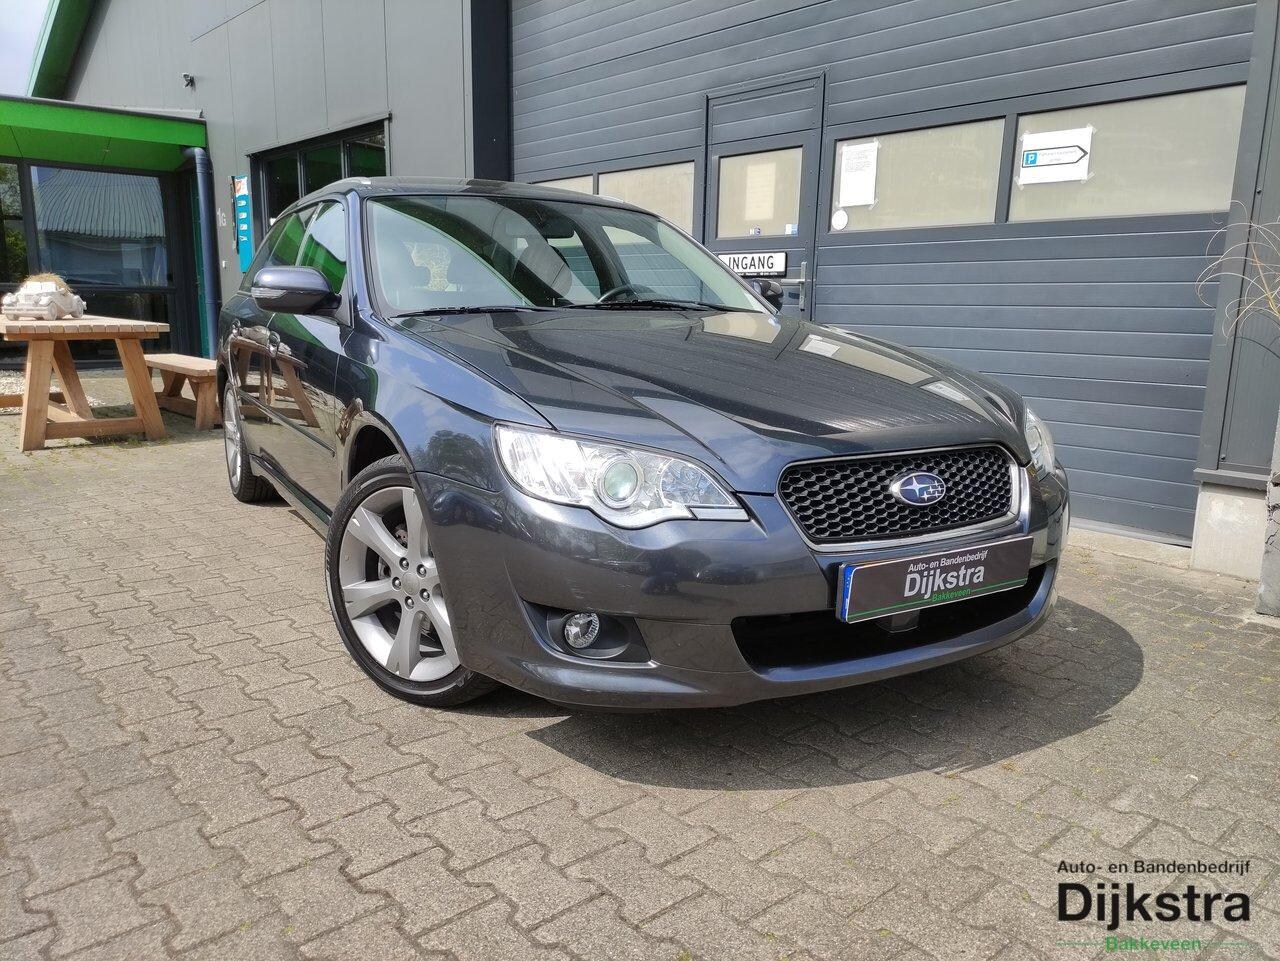 Subaru Legacy Touring Wagon - 2.0i Exclusive R. Edition AWD Low Gearing/ climate control/ cruise control/ trekhaak - AutoWereld.nl